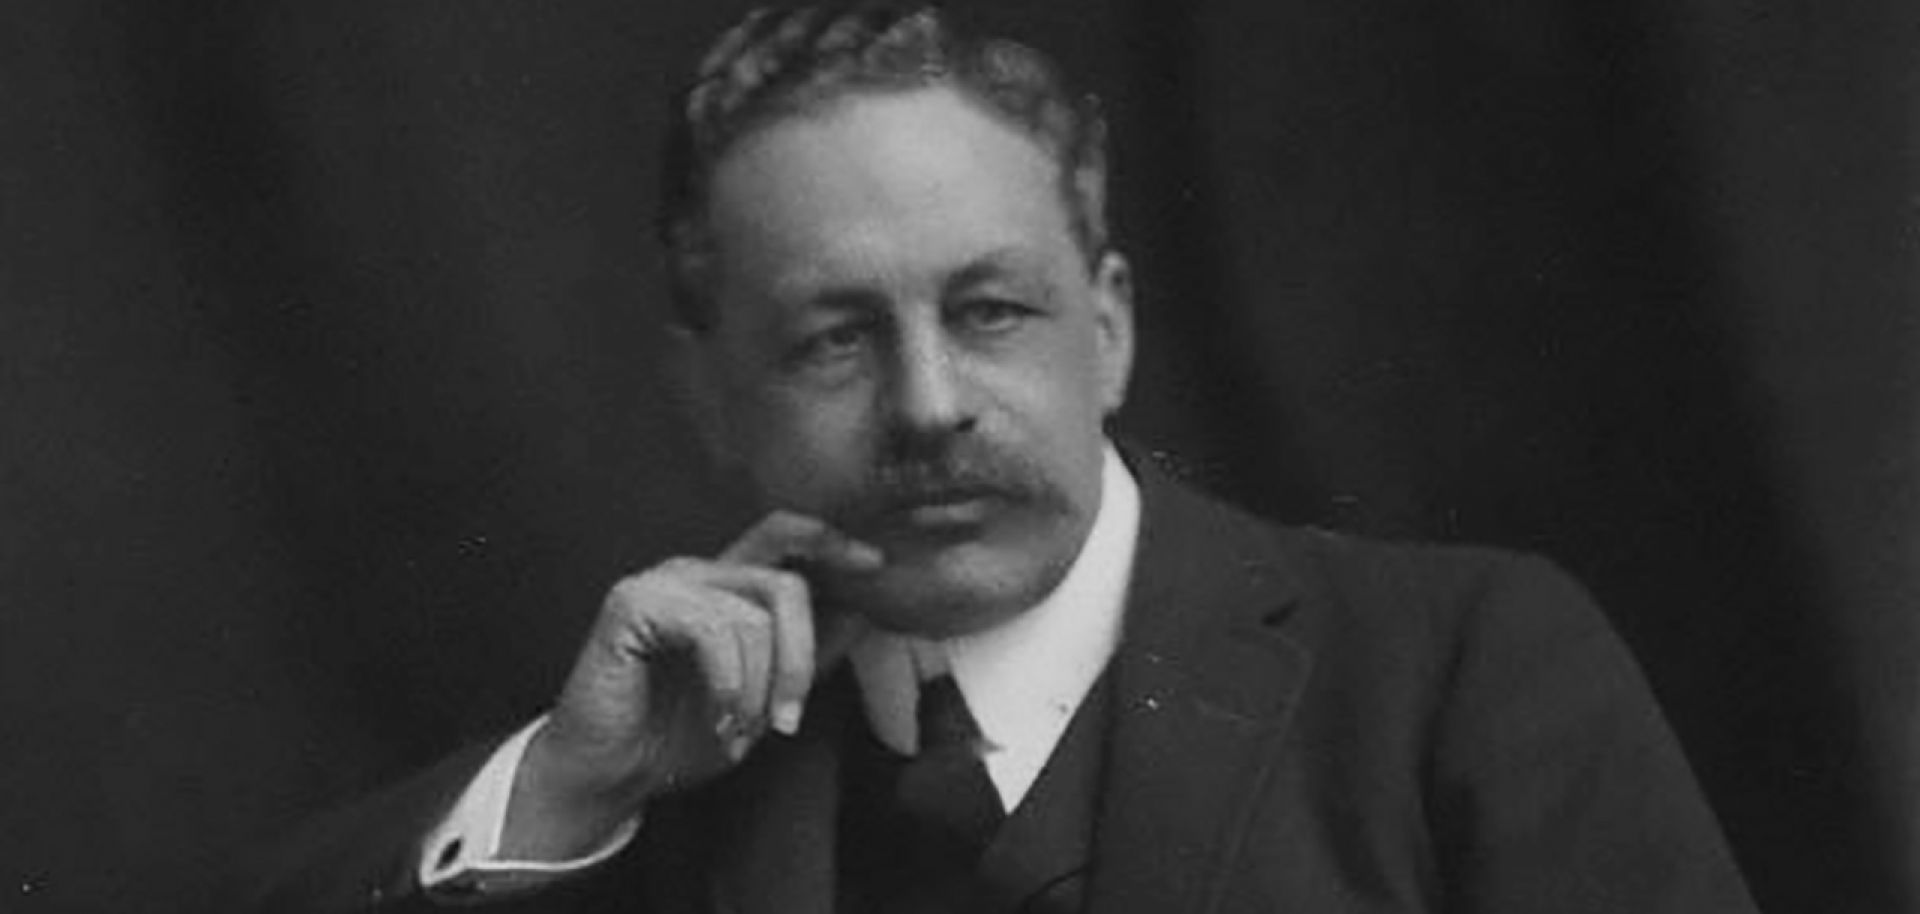 Halford Mackinder's 1919 work Democratic Ideals and Reality laid the groundwork for the kind of geopolitical analysis that Stratfor produces today.